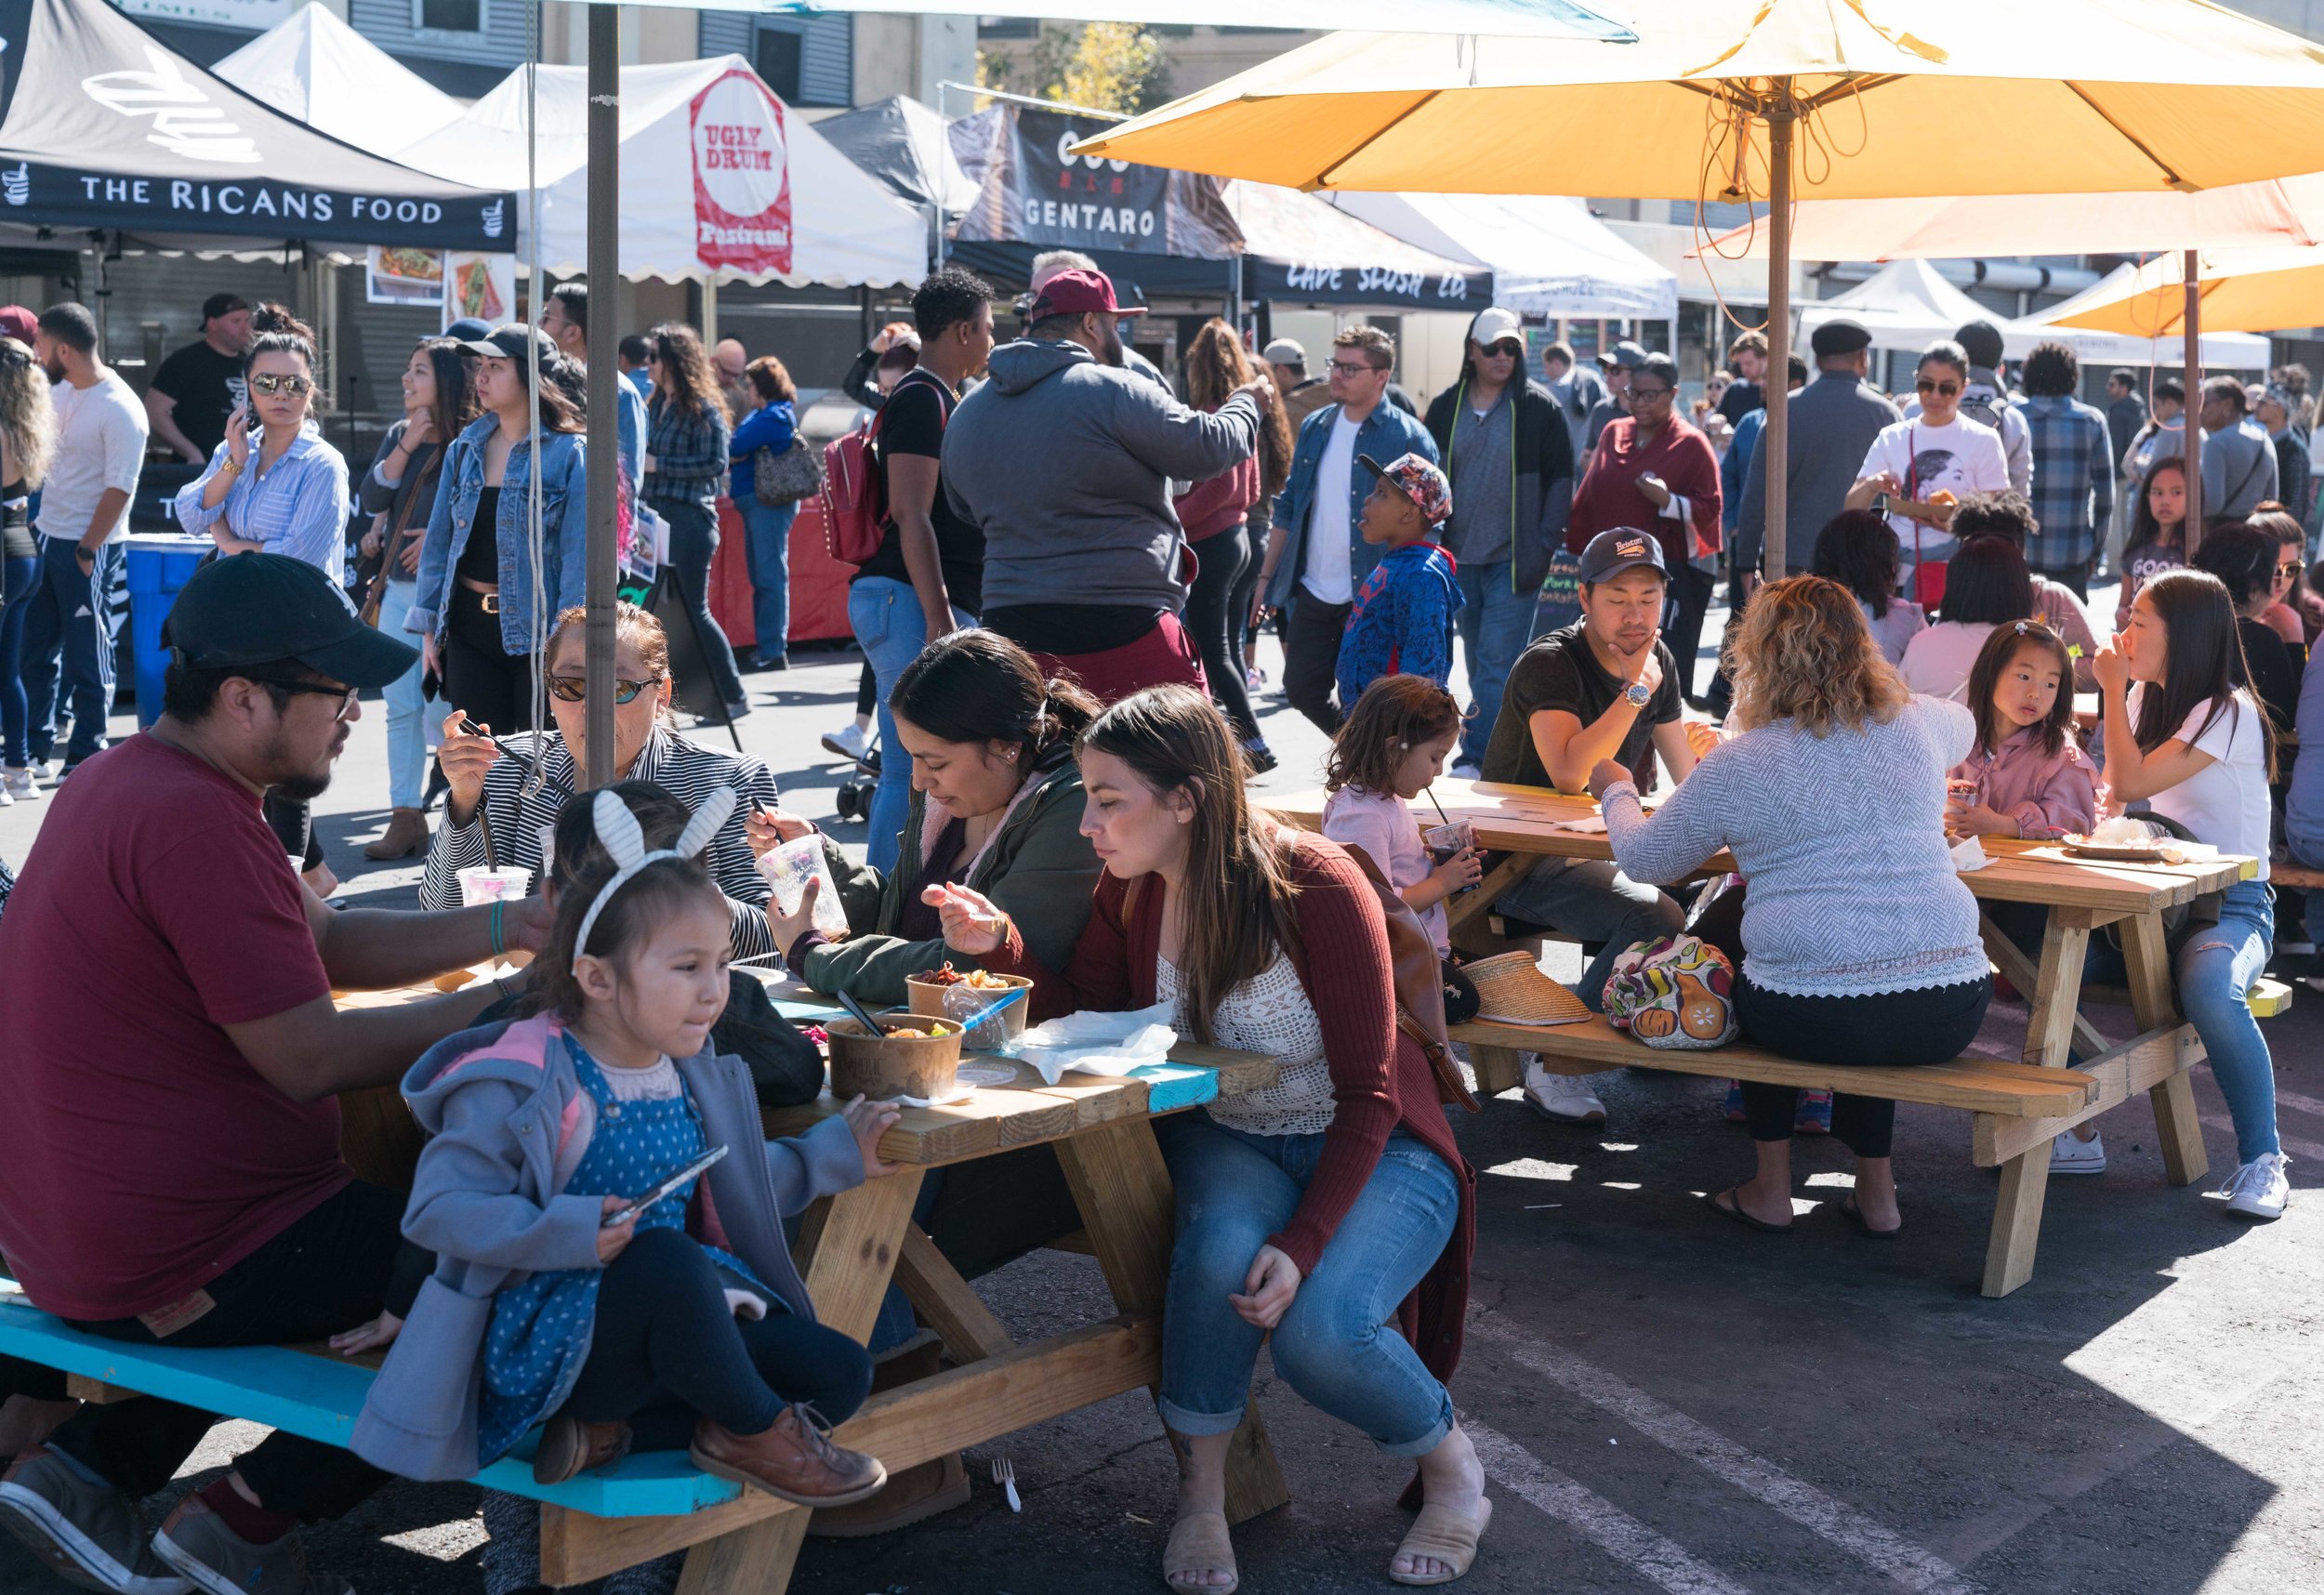  Diners at Smorgasburg LA in the downtown section of Los Angeles, Calif. on Sunday, February 25, 2018. Smorgasburg LA is a collection of food and shopping vendors that gather each Sunday at Row DTLA. (Photo by Helena Sung) 